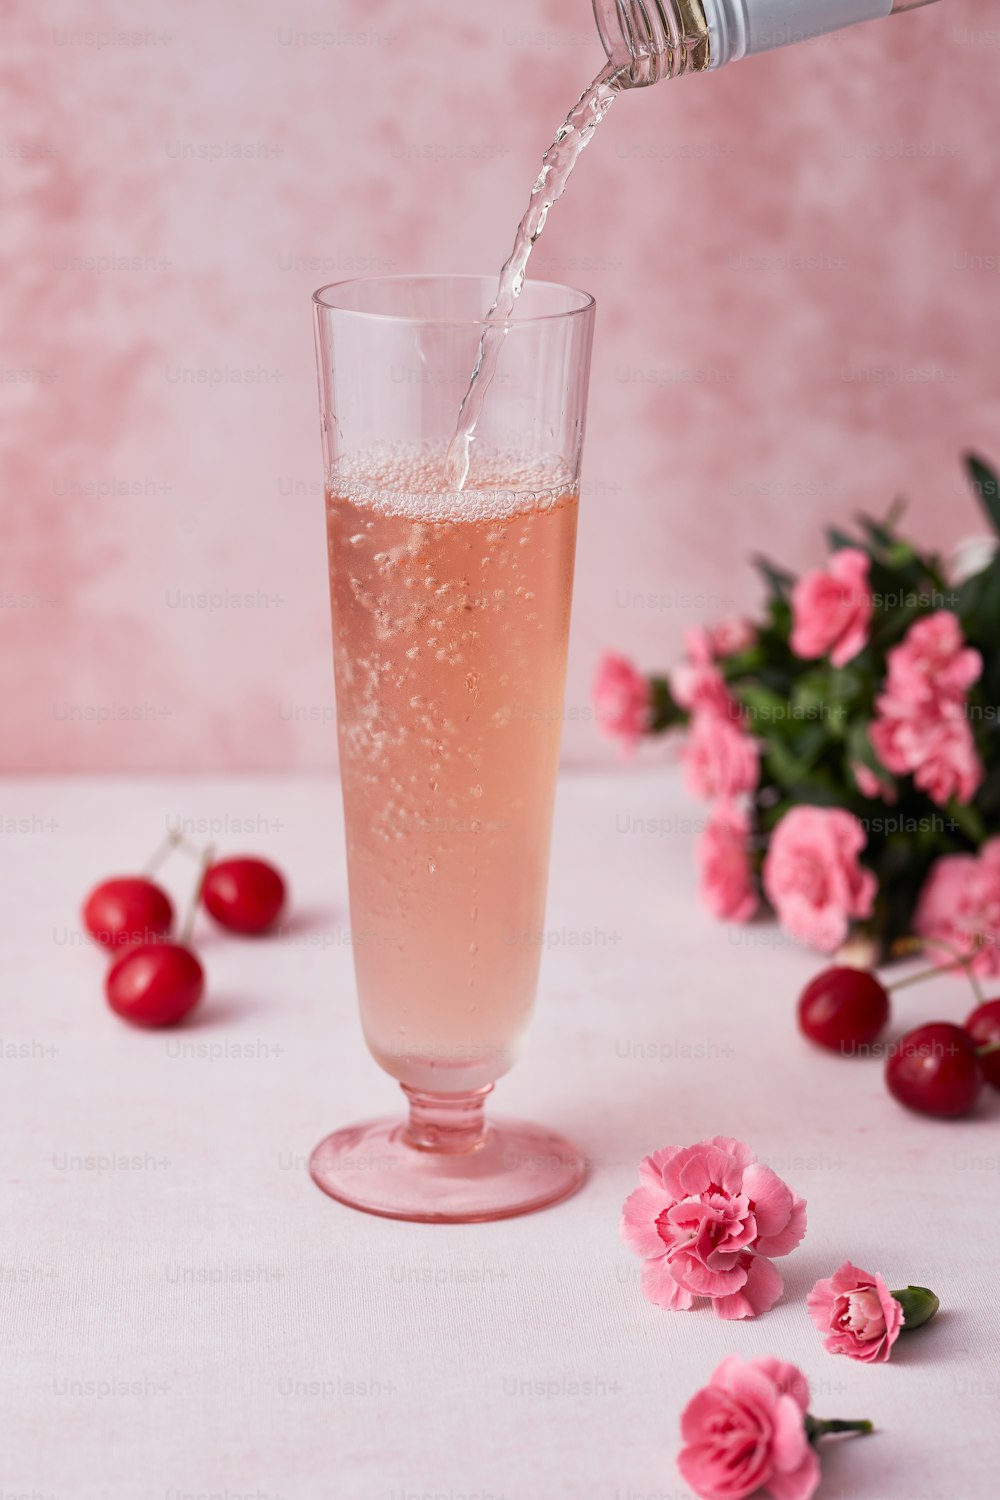 a glass filled with liquid next to pink flowers